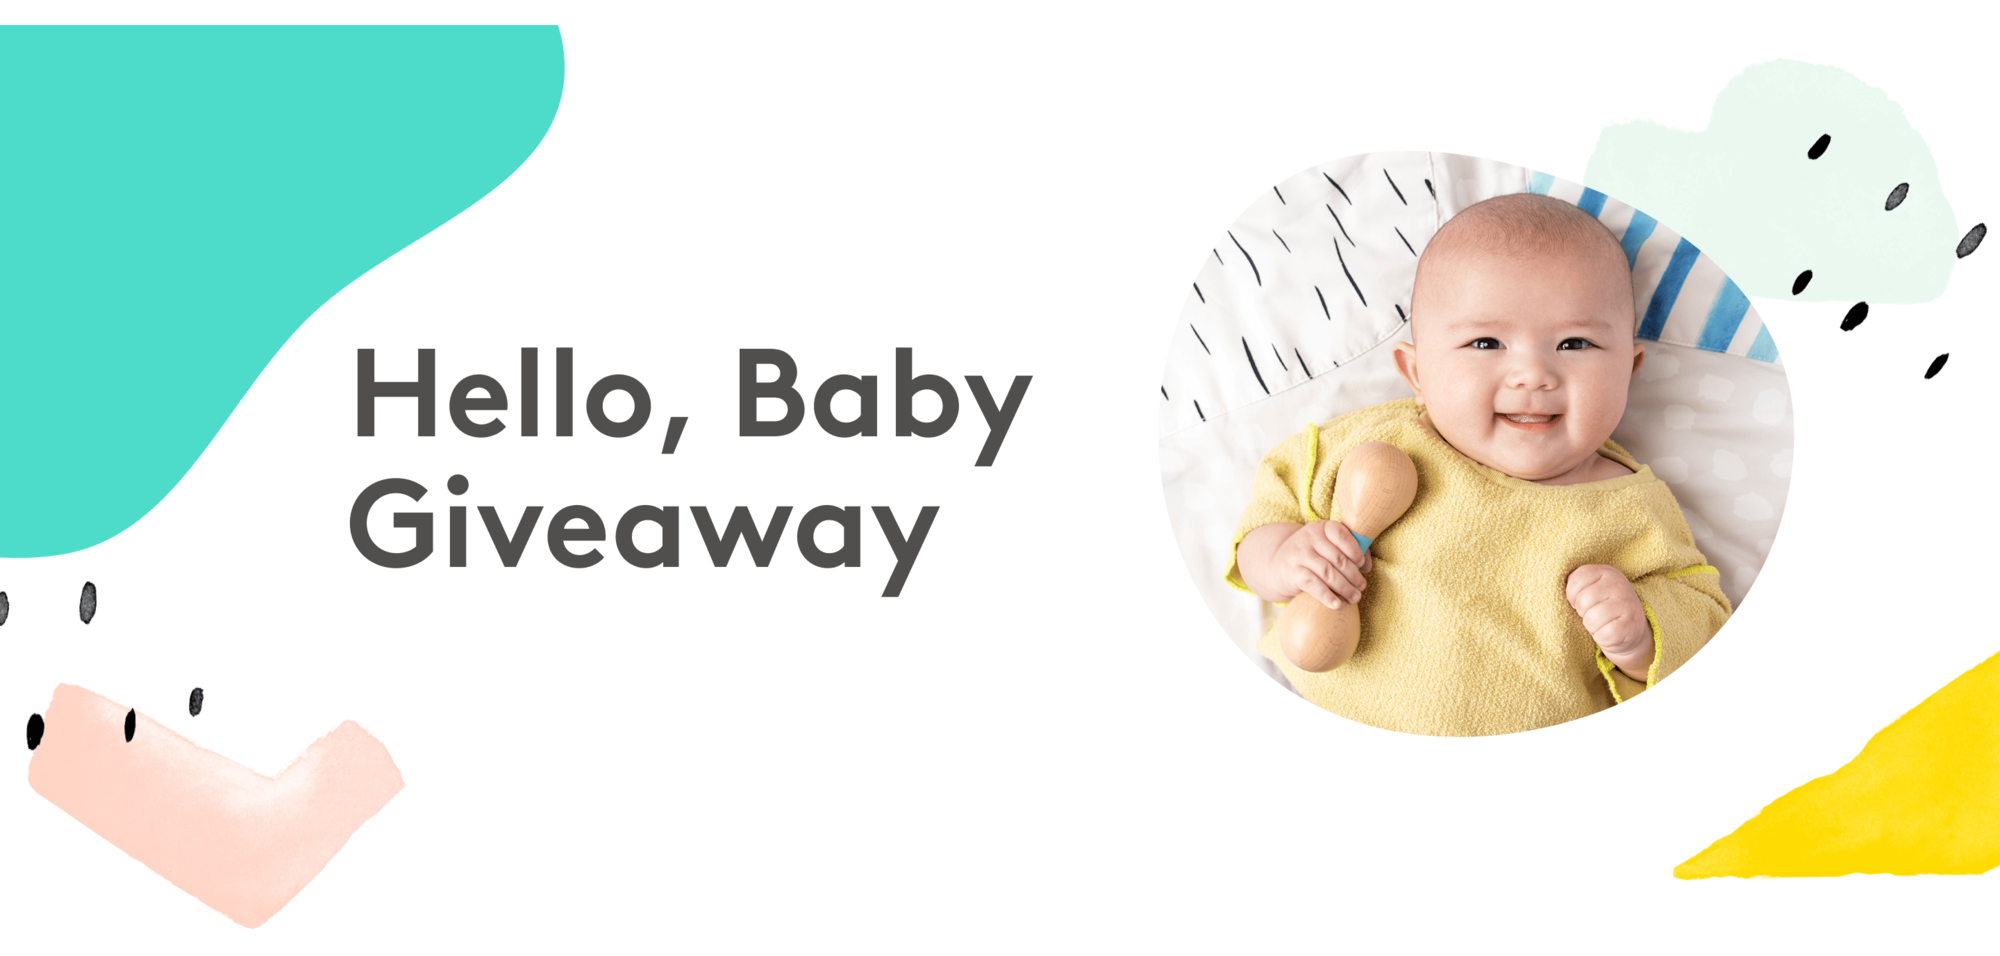 Hello, Baby Giveaway banner showing a child playing with a rattle